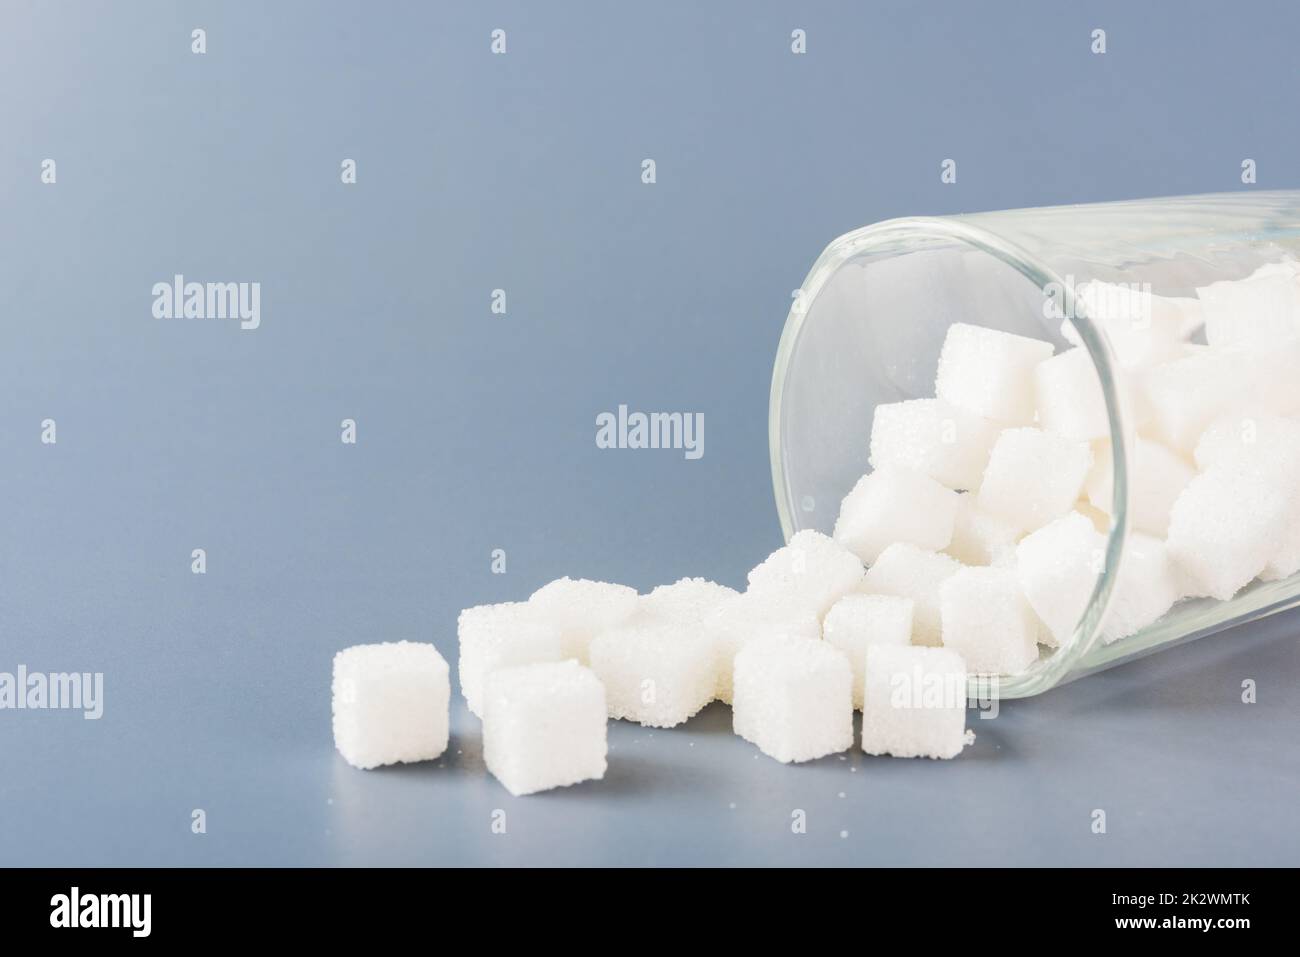 sugar cube sweet food ingredient spilled out of the glass Stock Photo